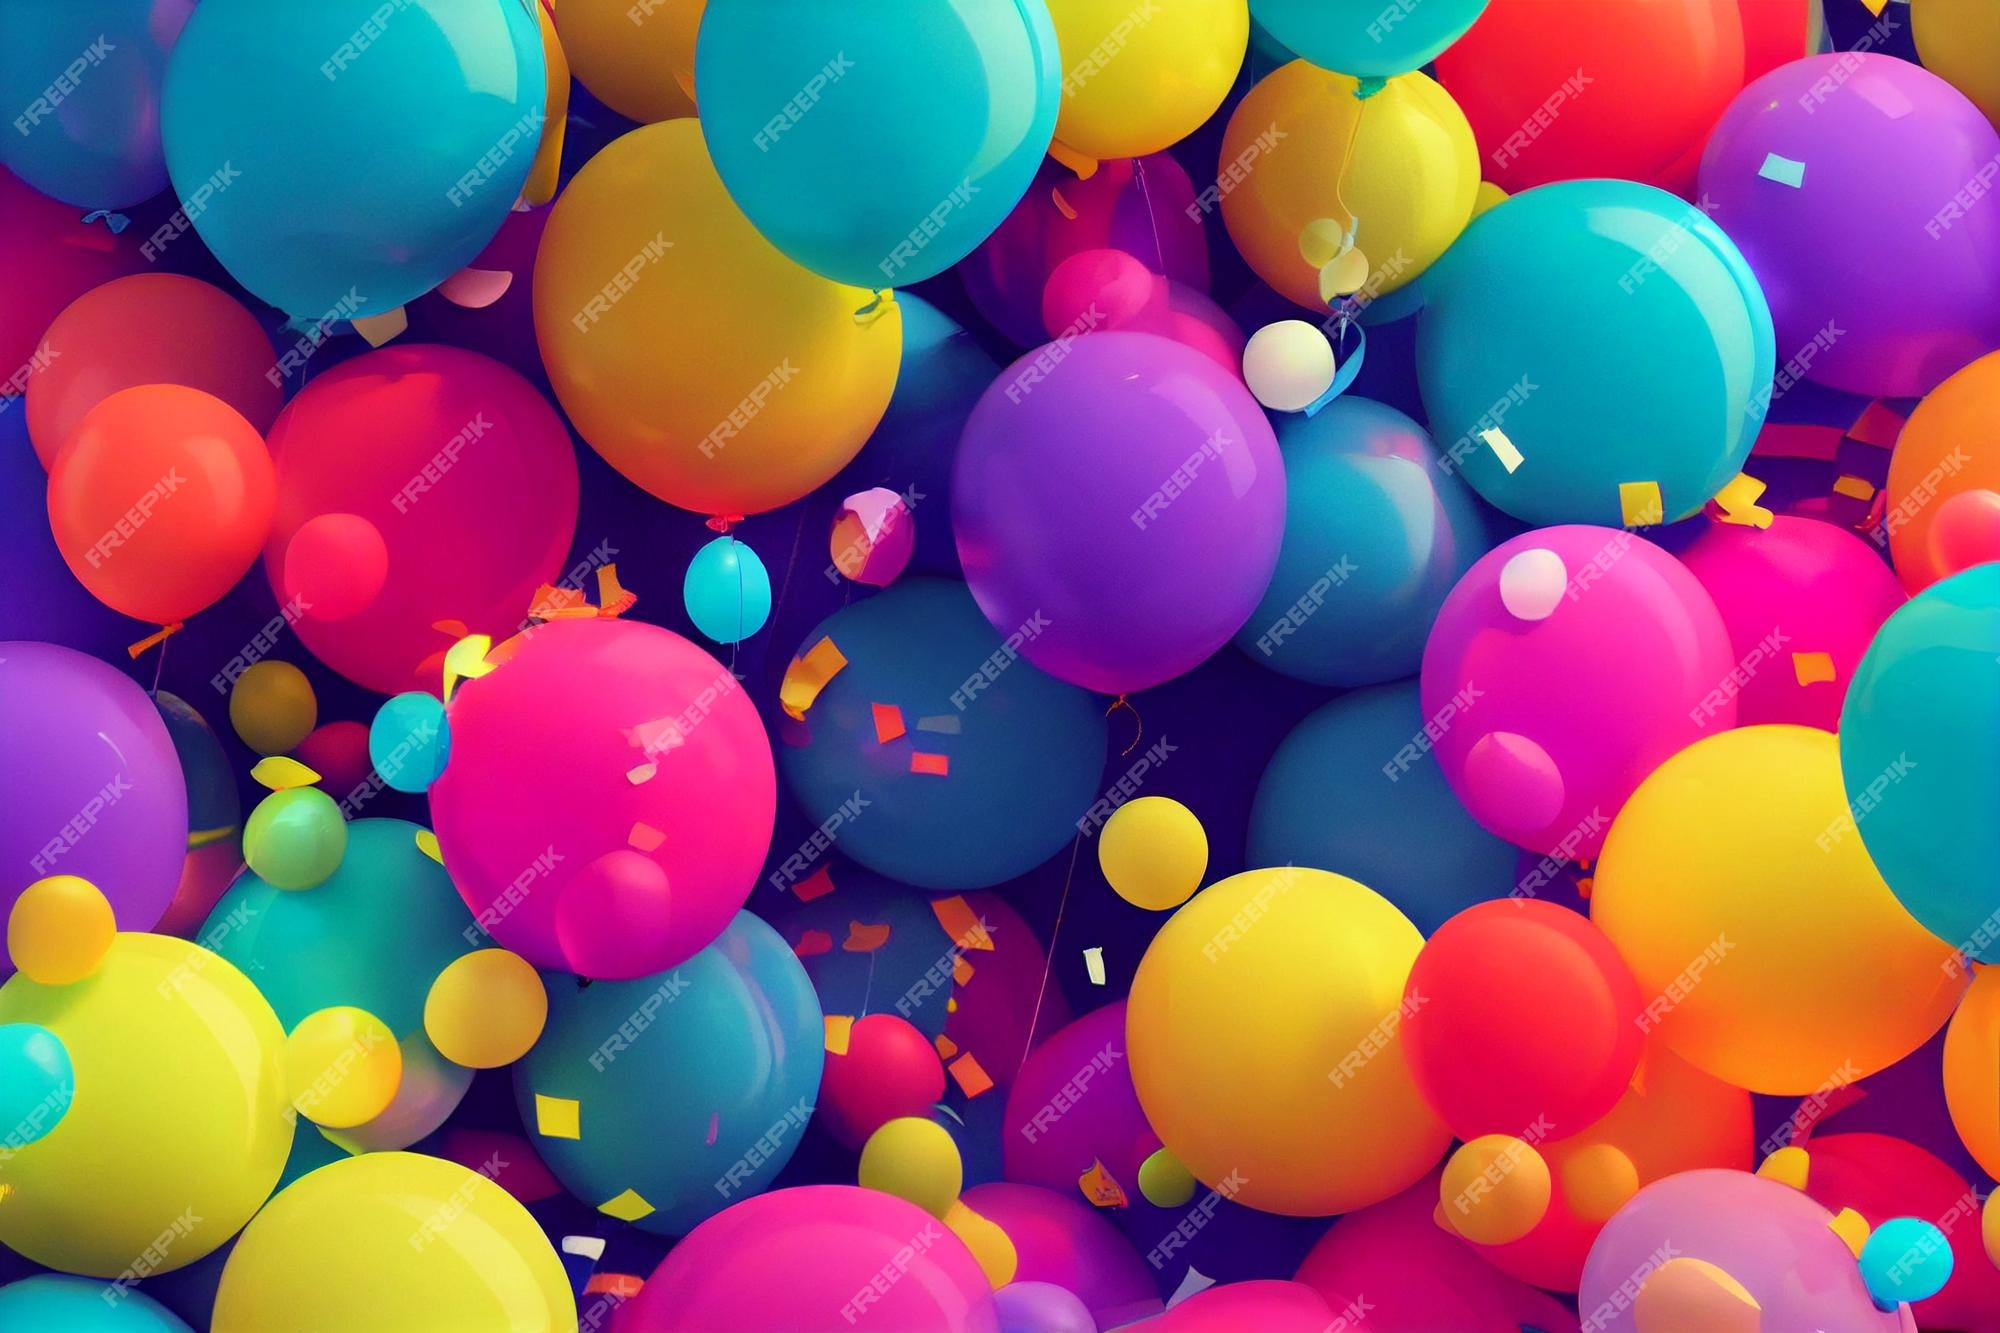 Premium Photo | Wallpaper background of a birthday colorful balloons  confetti and birthday party hats composition party and celebration concept